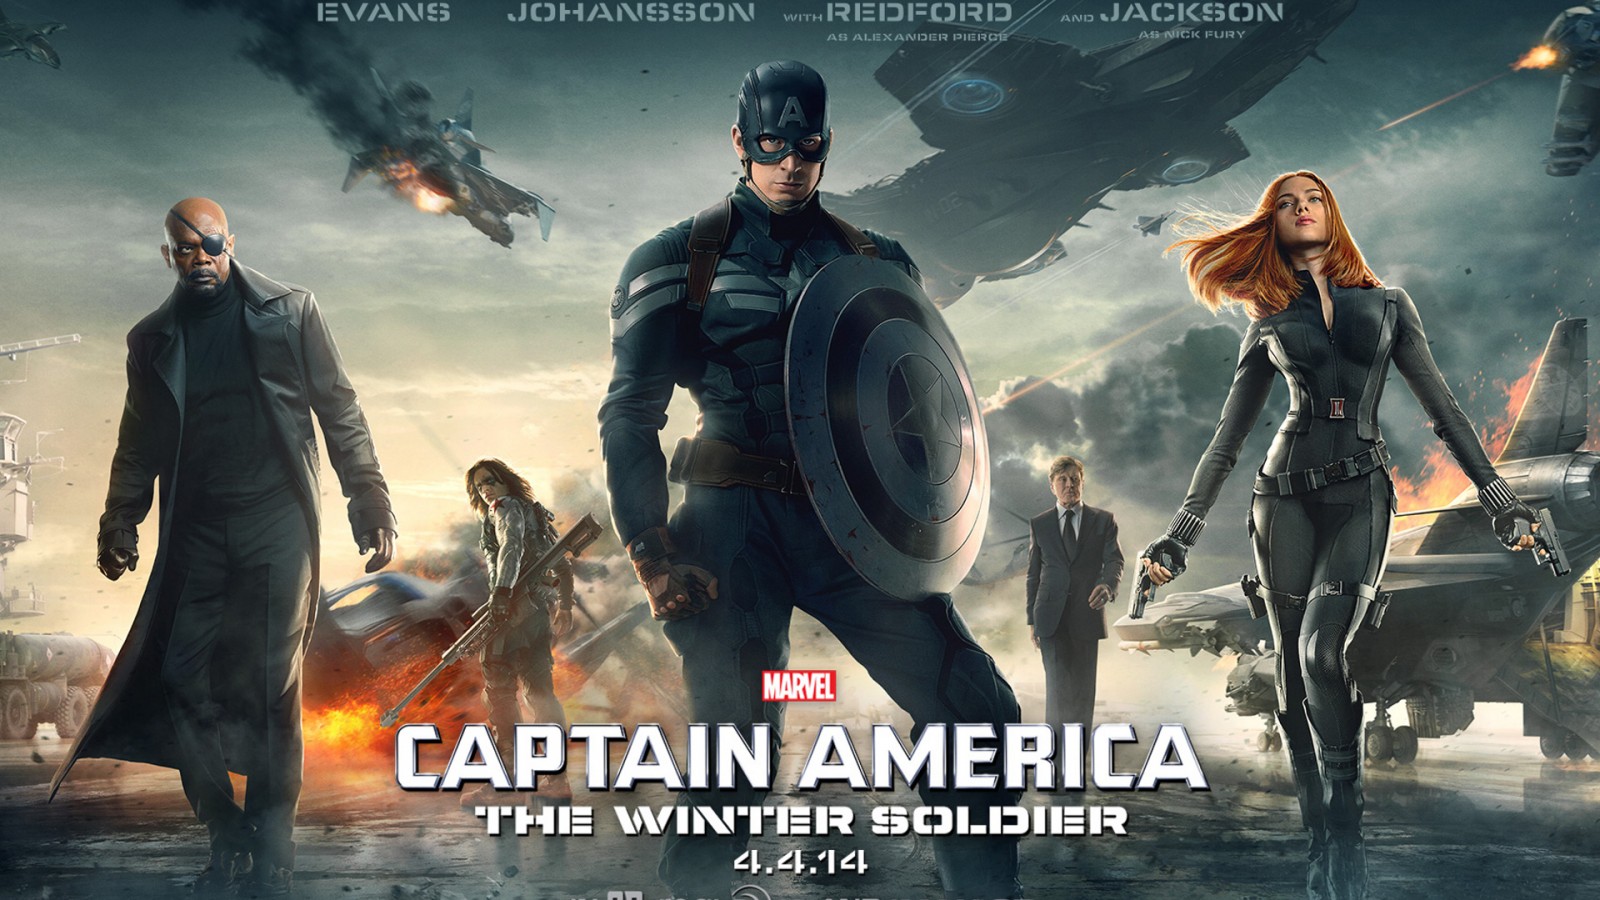 Captain America 2014 Movie Widescreen and Full HD Wallpapers